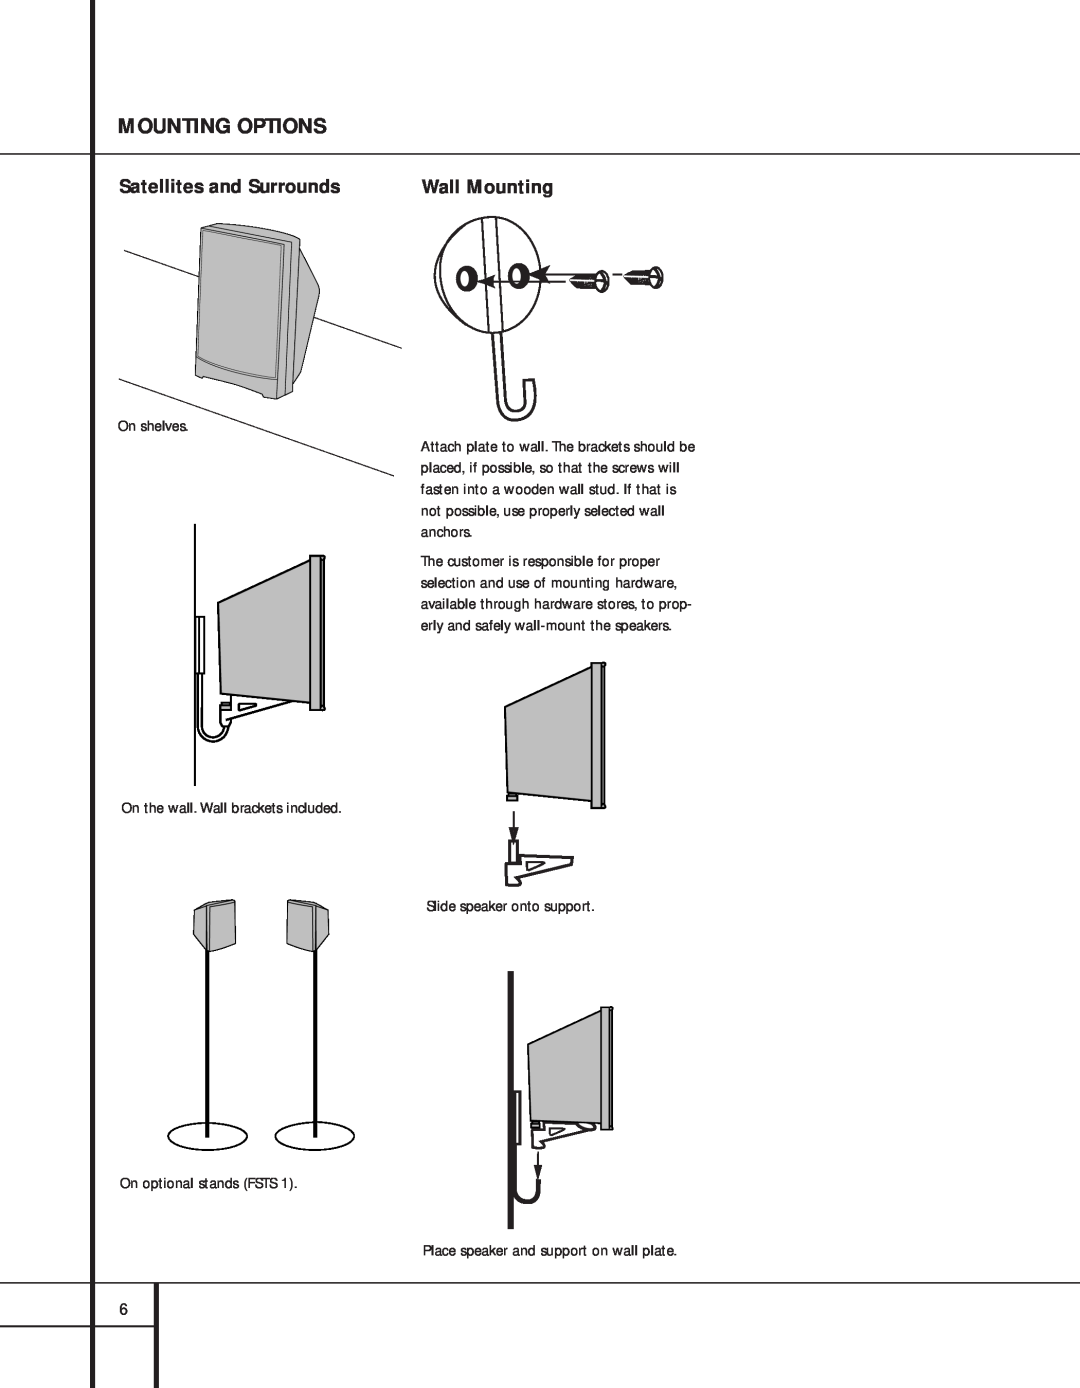 Harman-Kardon 201, Home Theater System, HKTS 2 specifications Mounting Options, Satellites and Surrounds, Wall Mounting 